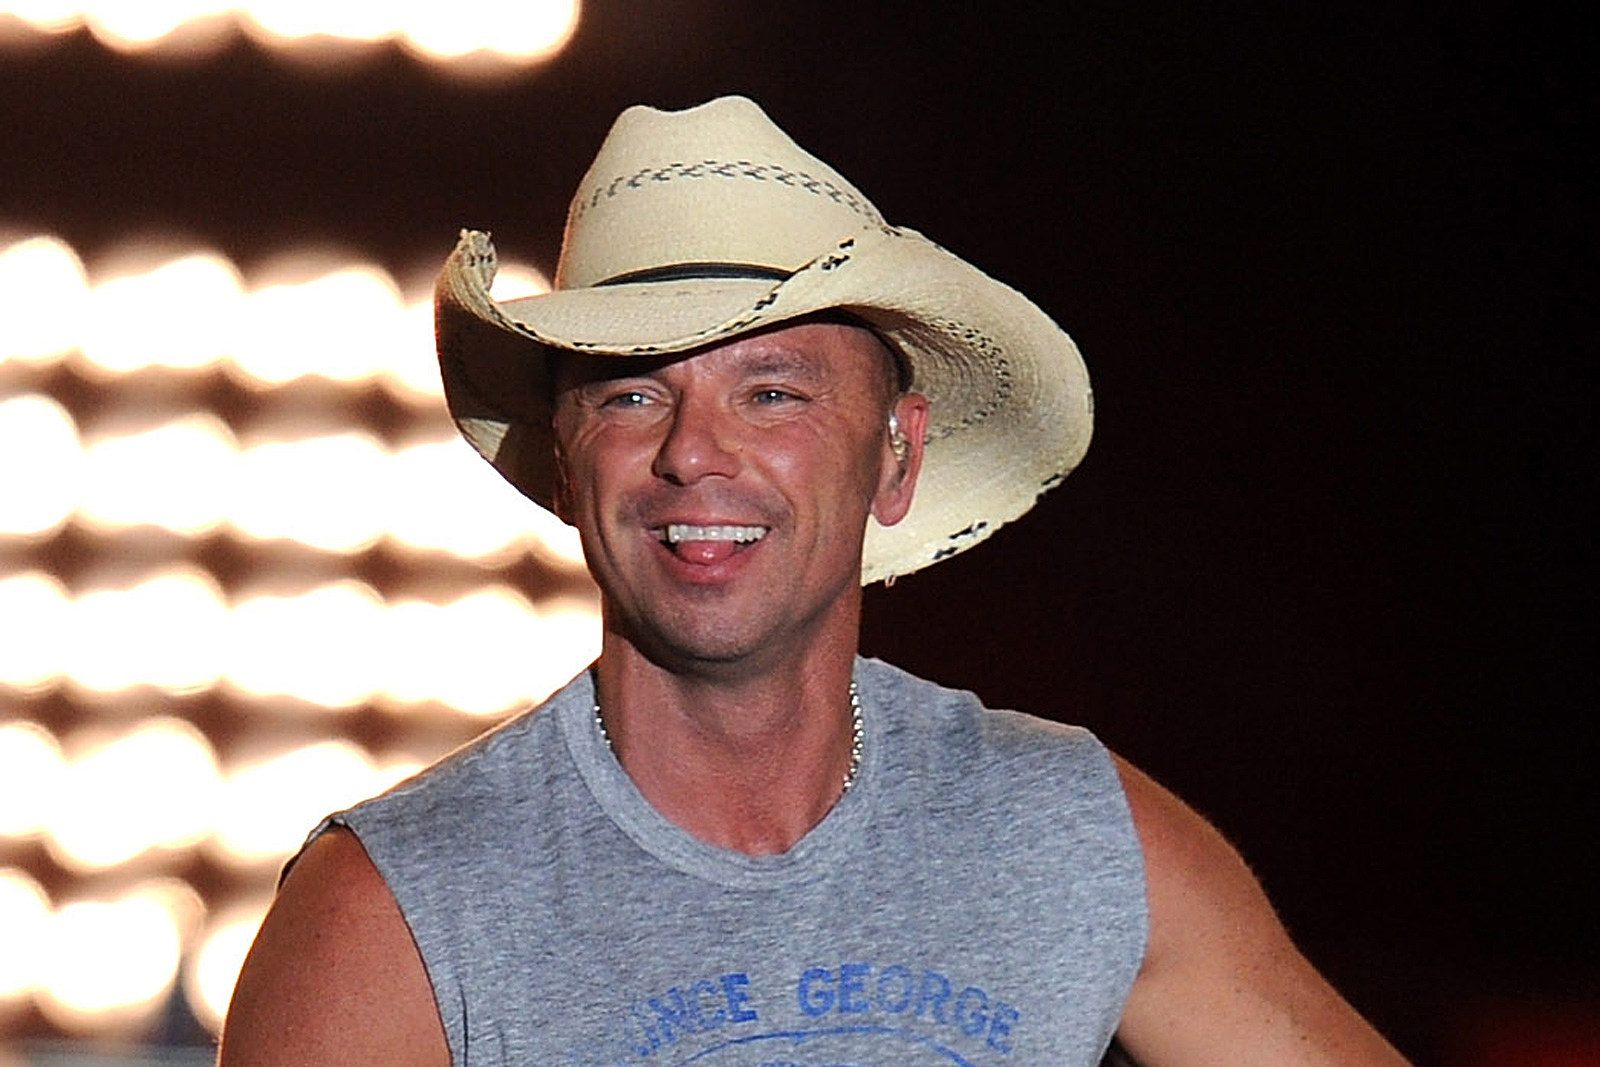 Kenny Chesney’s ‘Just to Say We Did’ Offers an Important Message